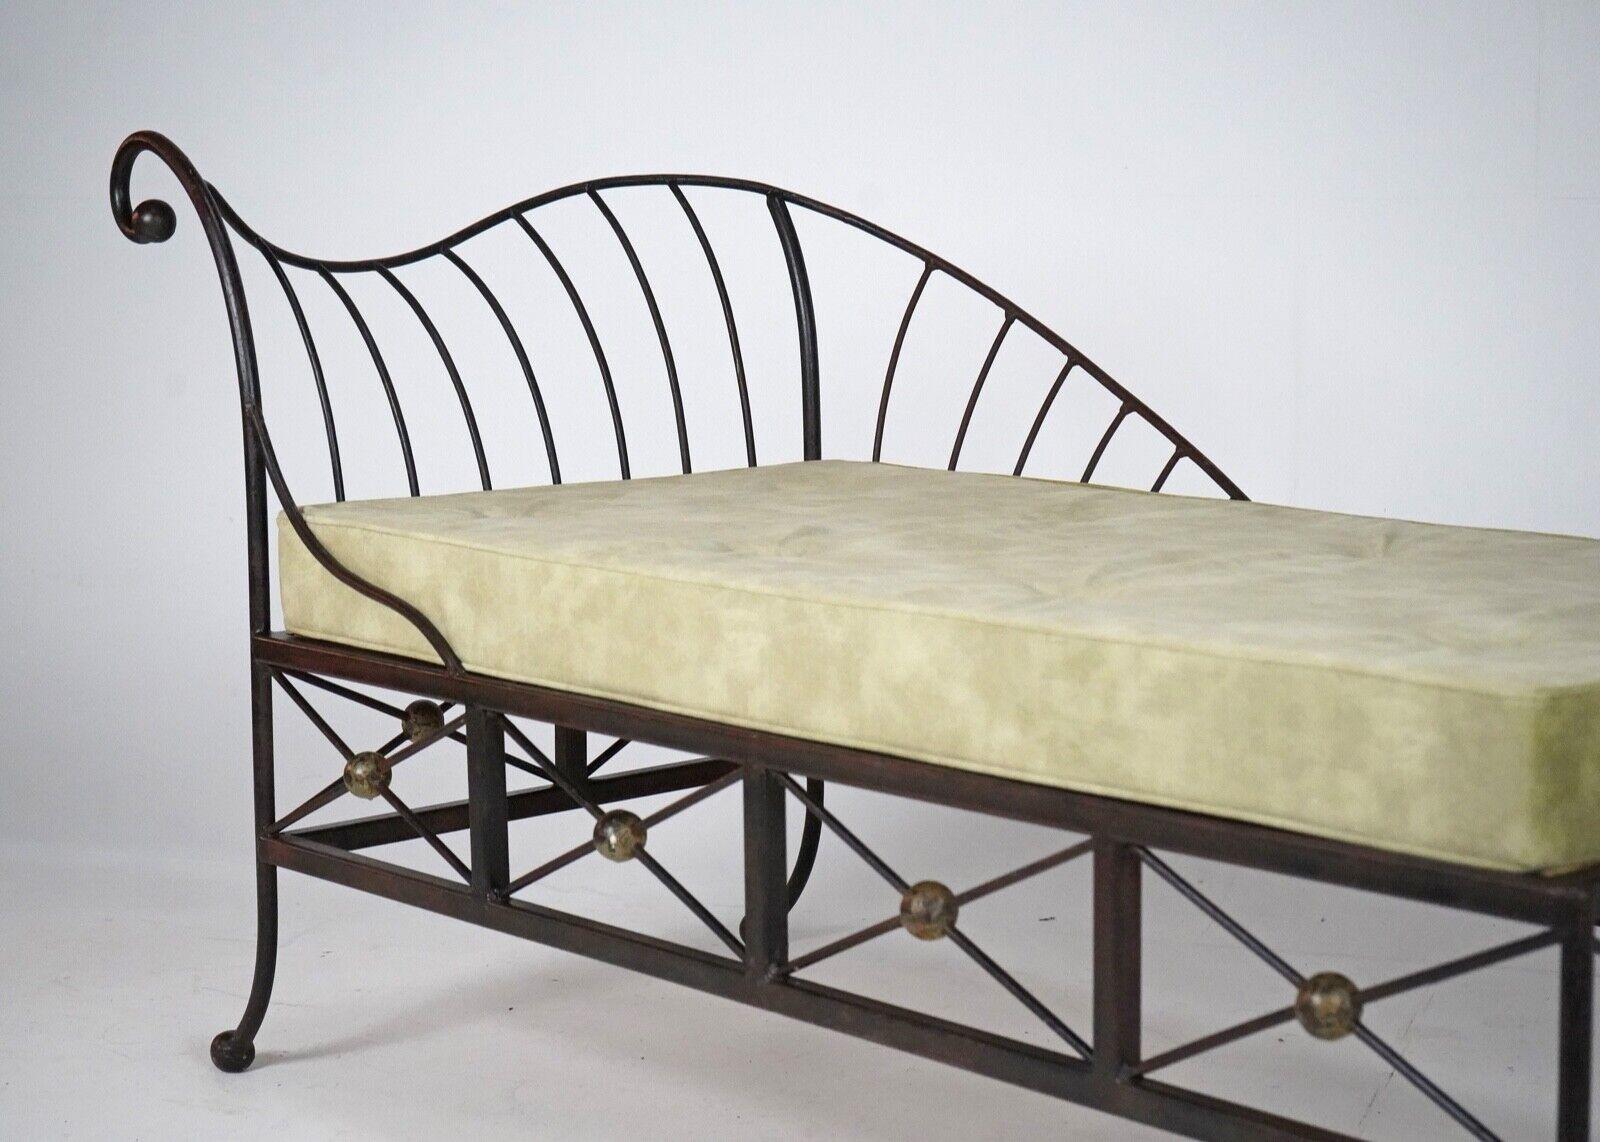 20th Century Vintage French Box Steel Metal Day Bed, Sun Lounger, Chaise Lounge Green Seat